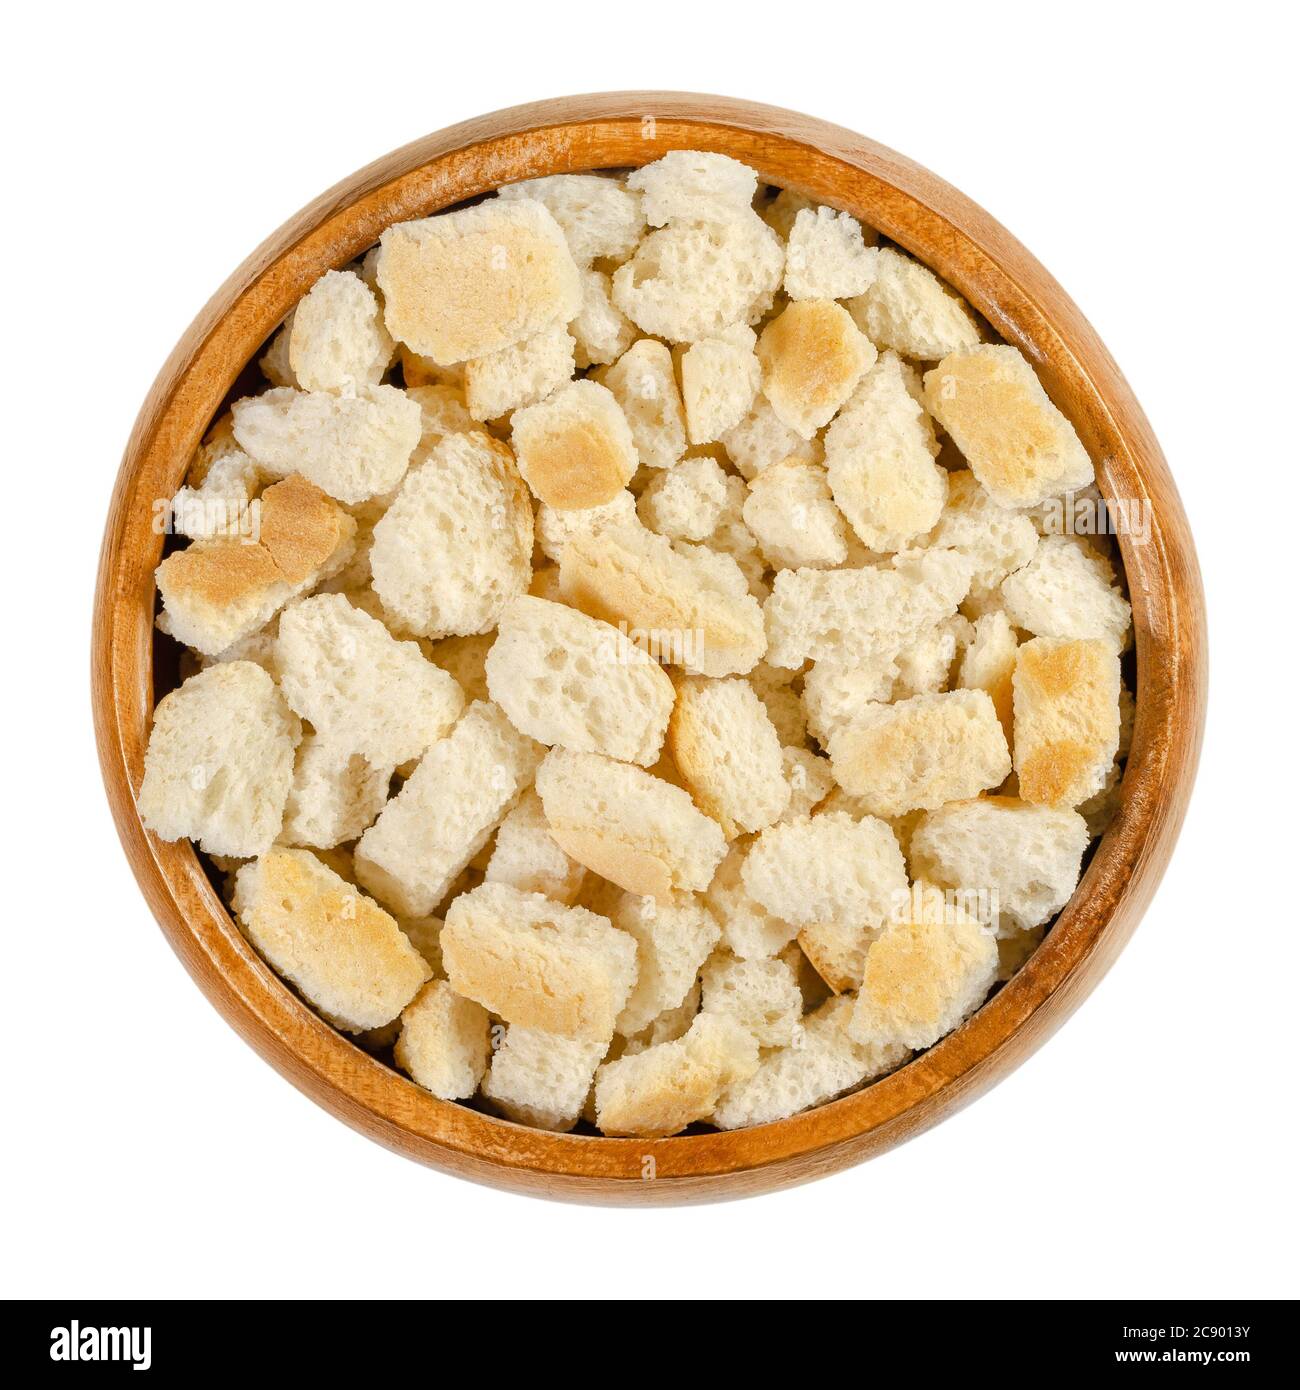 Dry bread cubes for stuffing, in a wooden bowl. Made of rolls, cut into cubes and dried, used for bread stuffing recipes like bread dumplings. Stock Photo